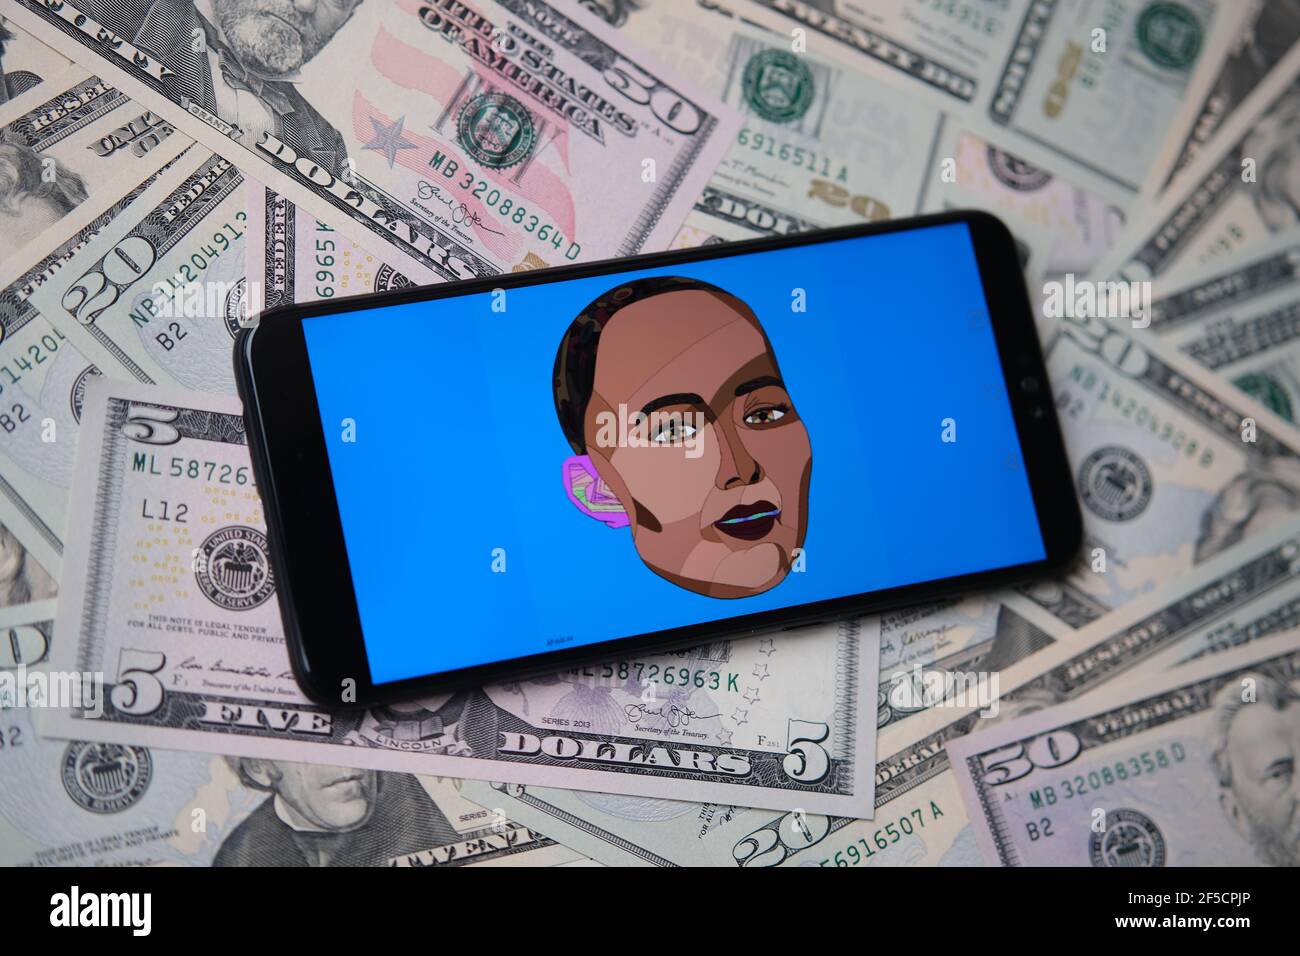 NFT self-portrait by Sophia the Robot. Self portrait by robot Sophia sold as NFT token seen on the smartphone which is placed on dollar banknotes. Con Stock Photo